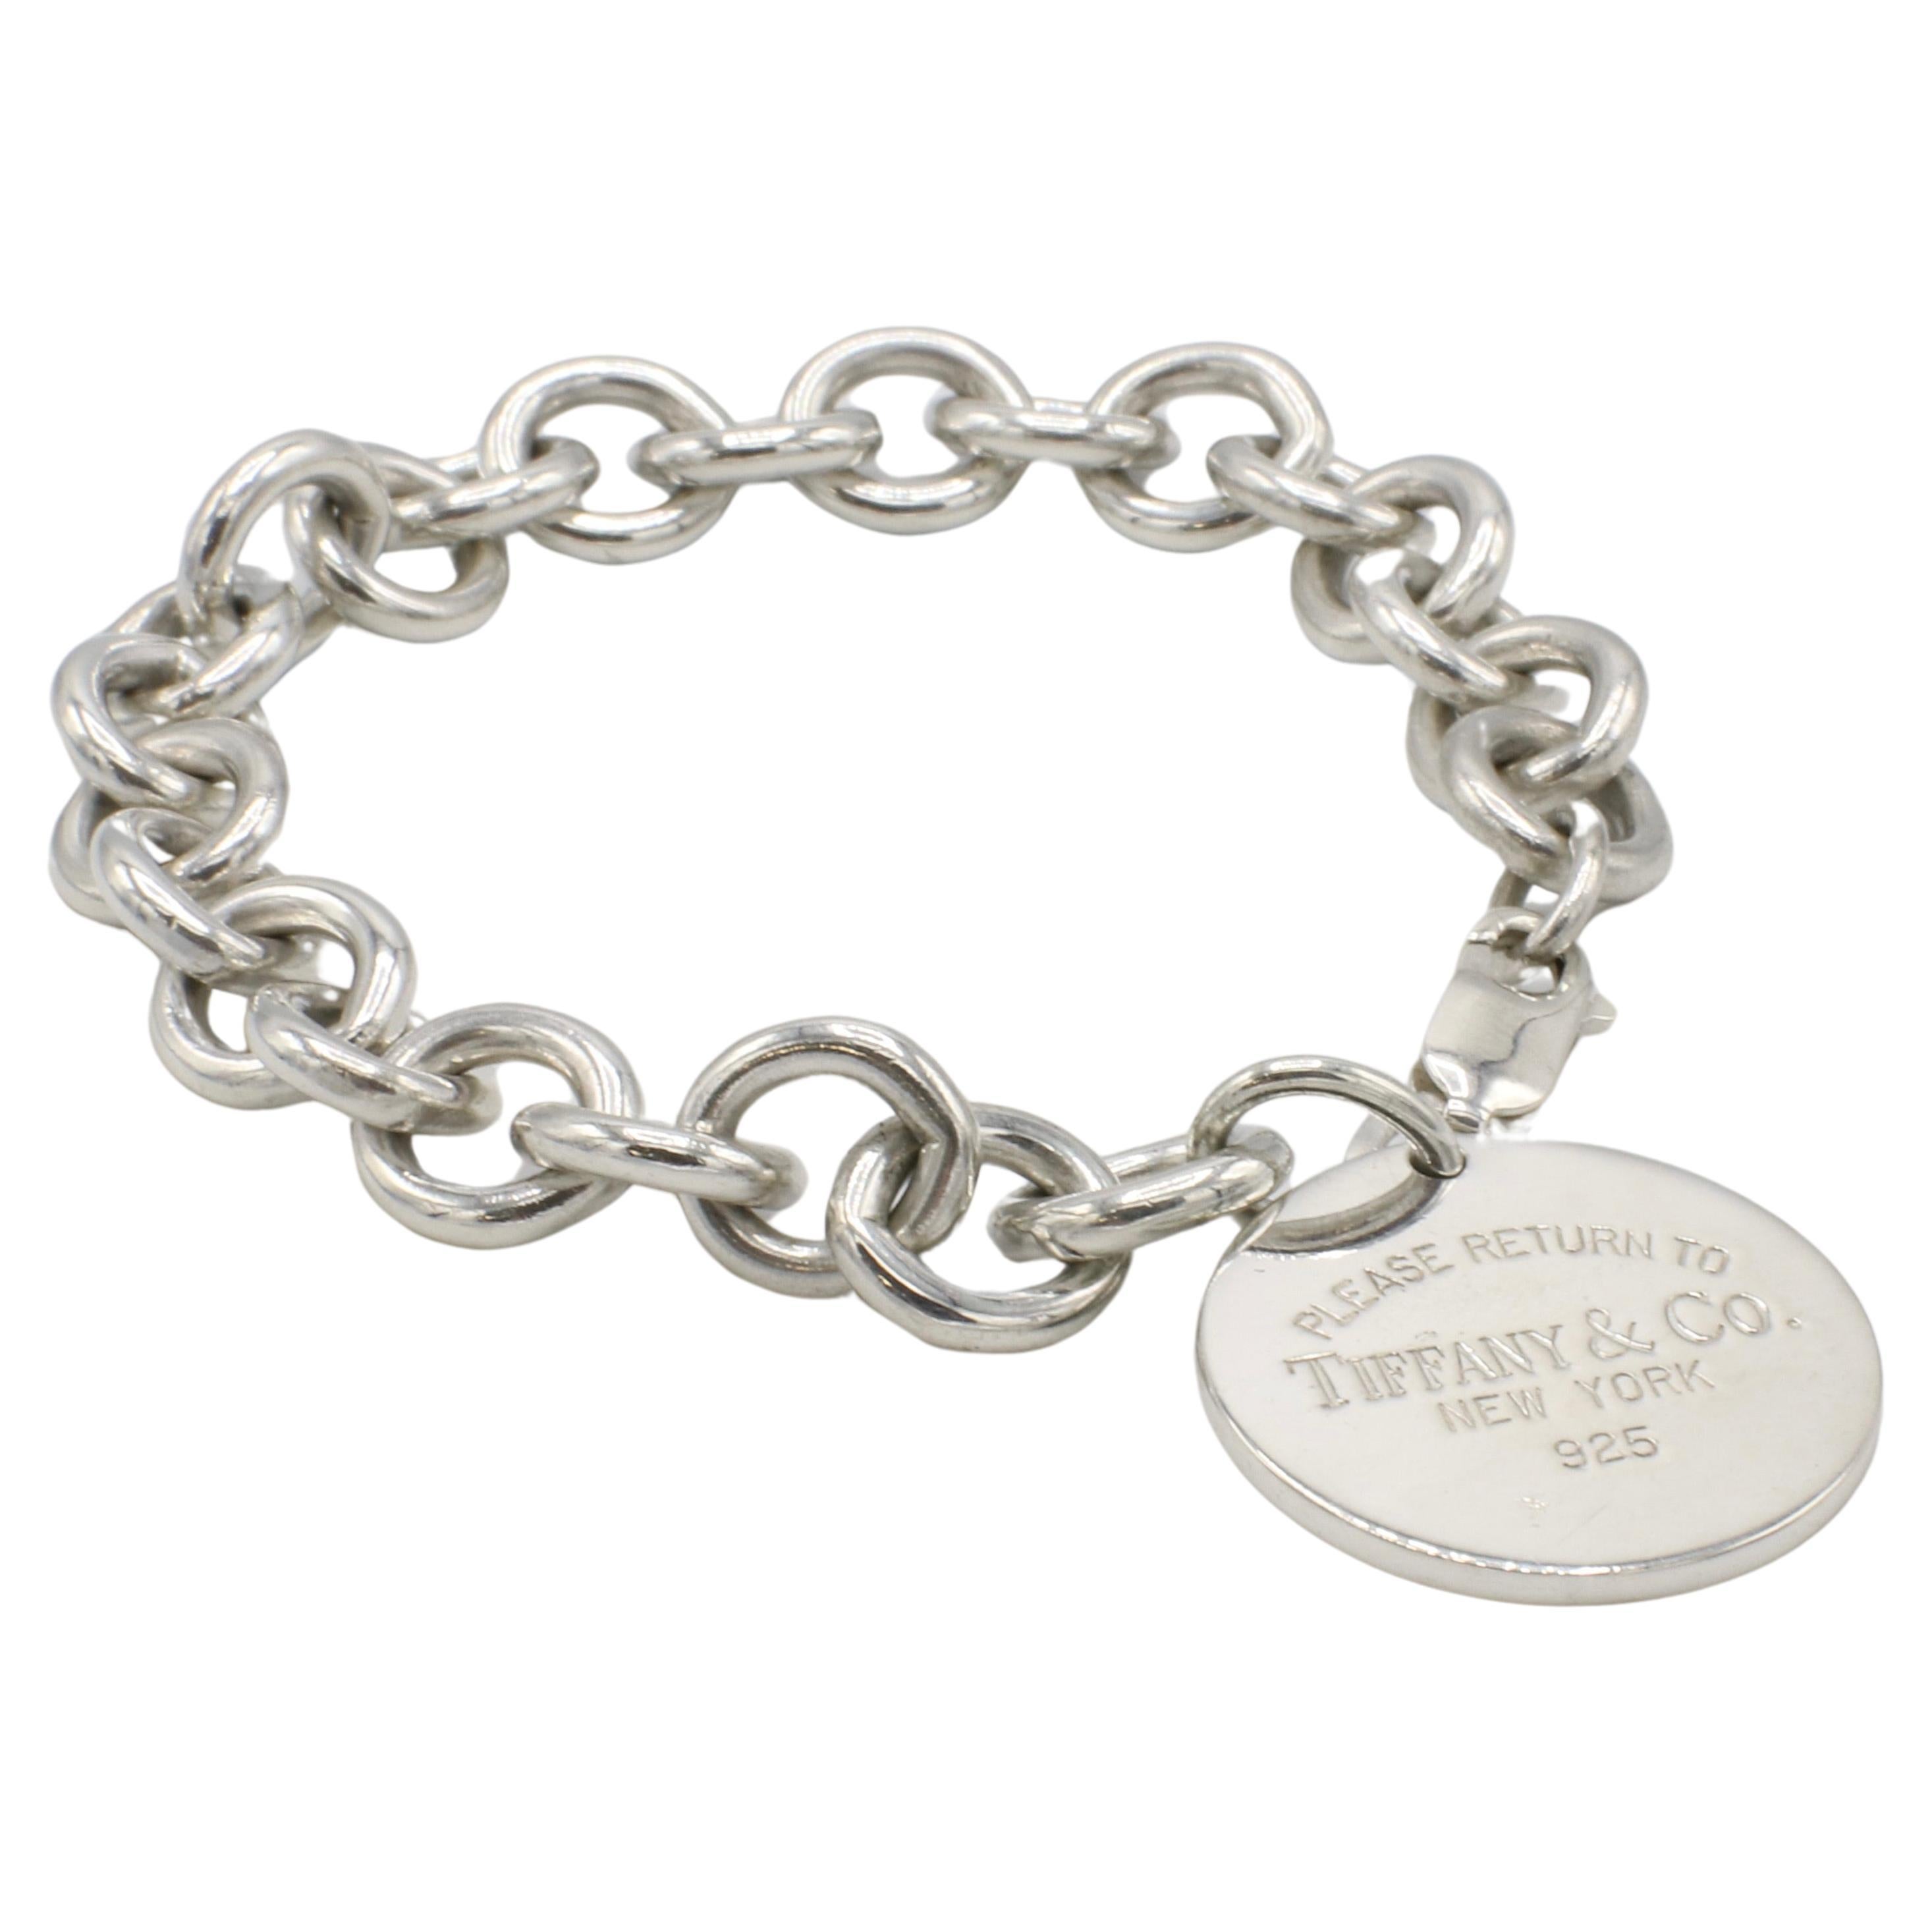 Tiffany & Co. Sterling Silver Return to Tiffany Circle Charm Link Bracelet 
Metal: Sterling silver 925
Weight: 36.27 grams
Length: 7 inches
Charm: Please Return to Tiffany & Co. New York 925, 24mm

